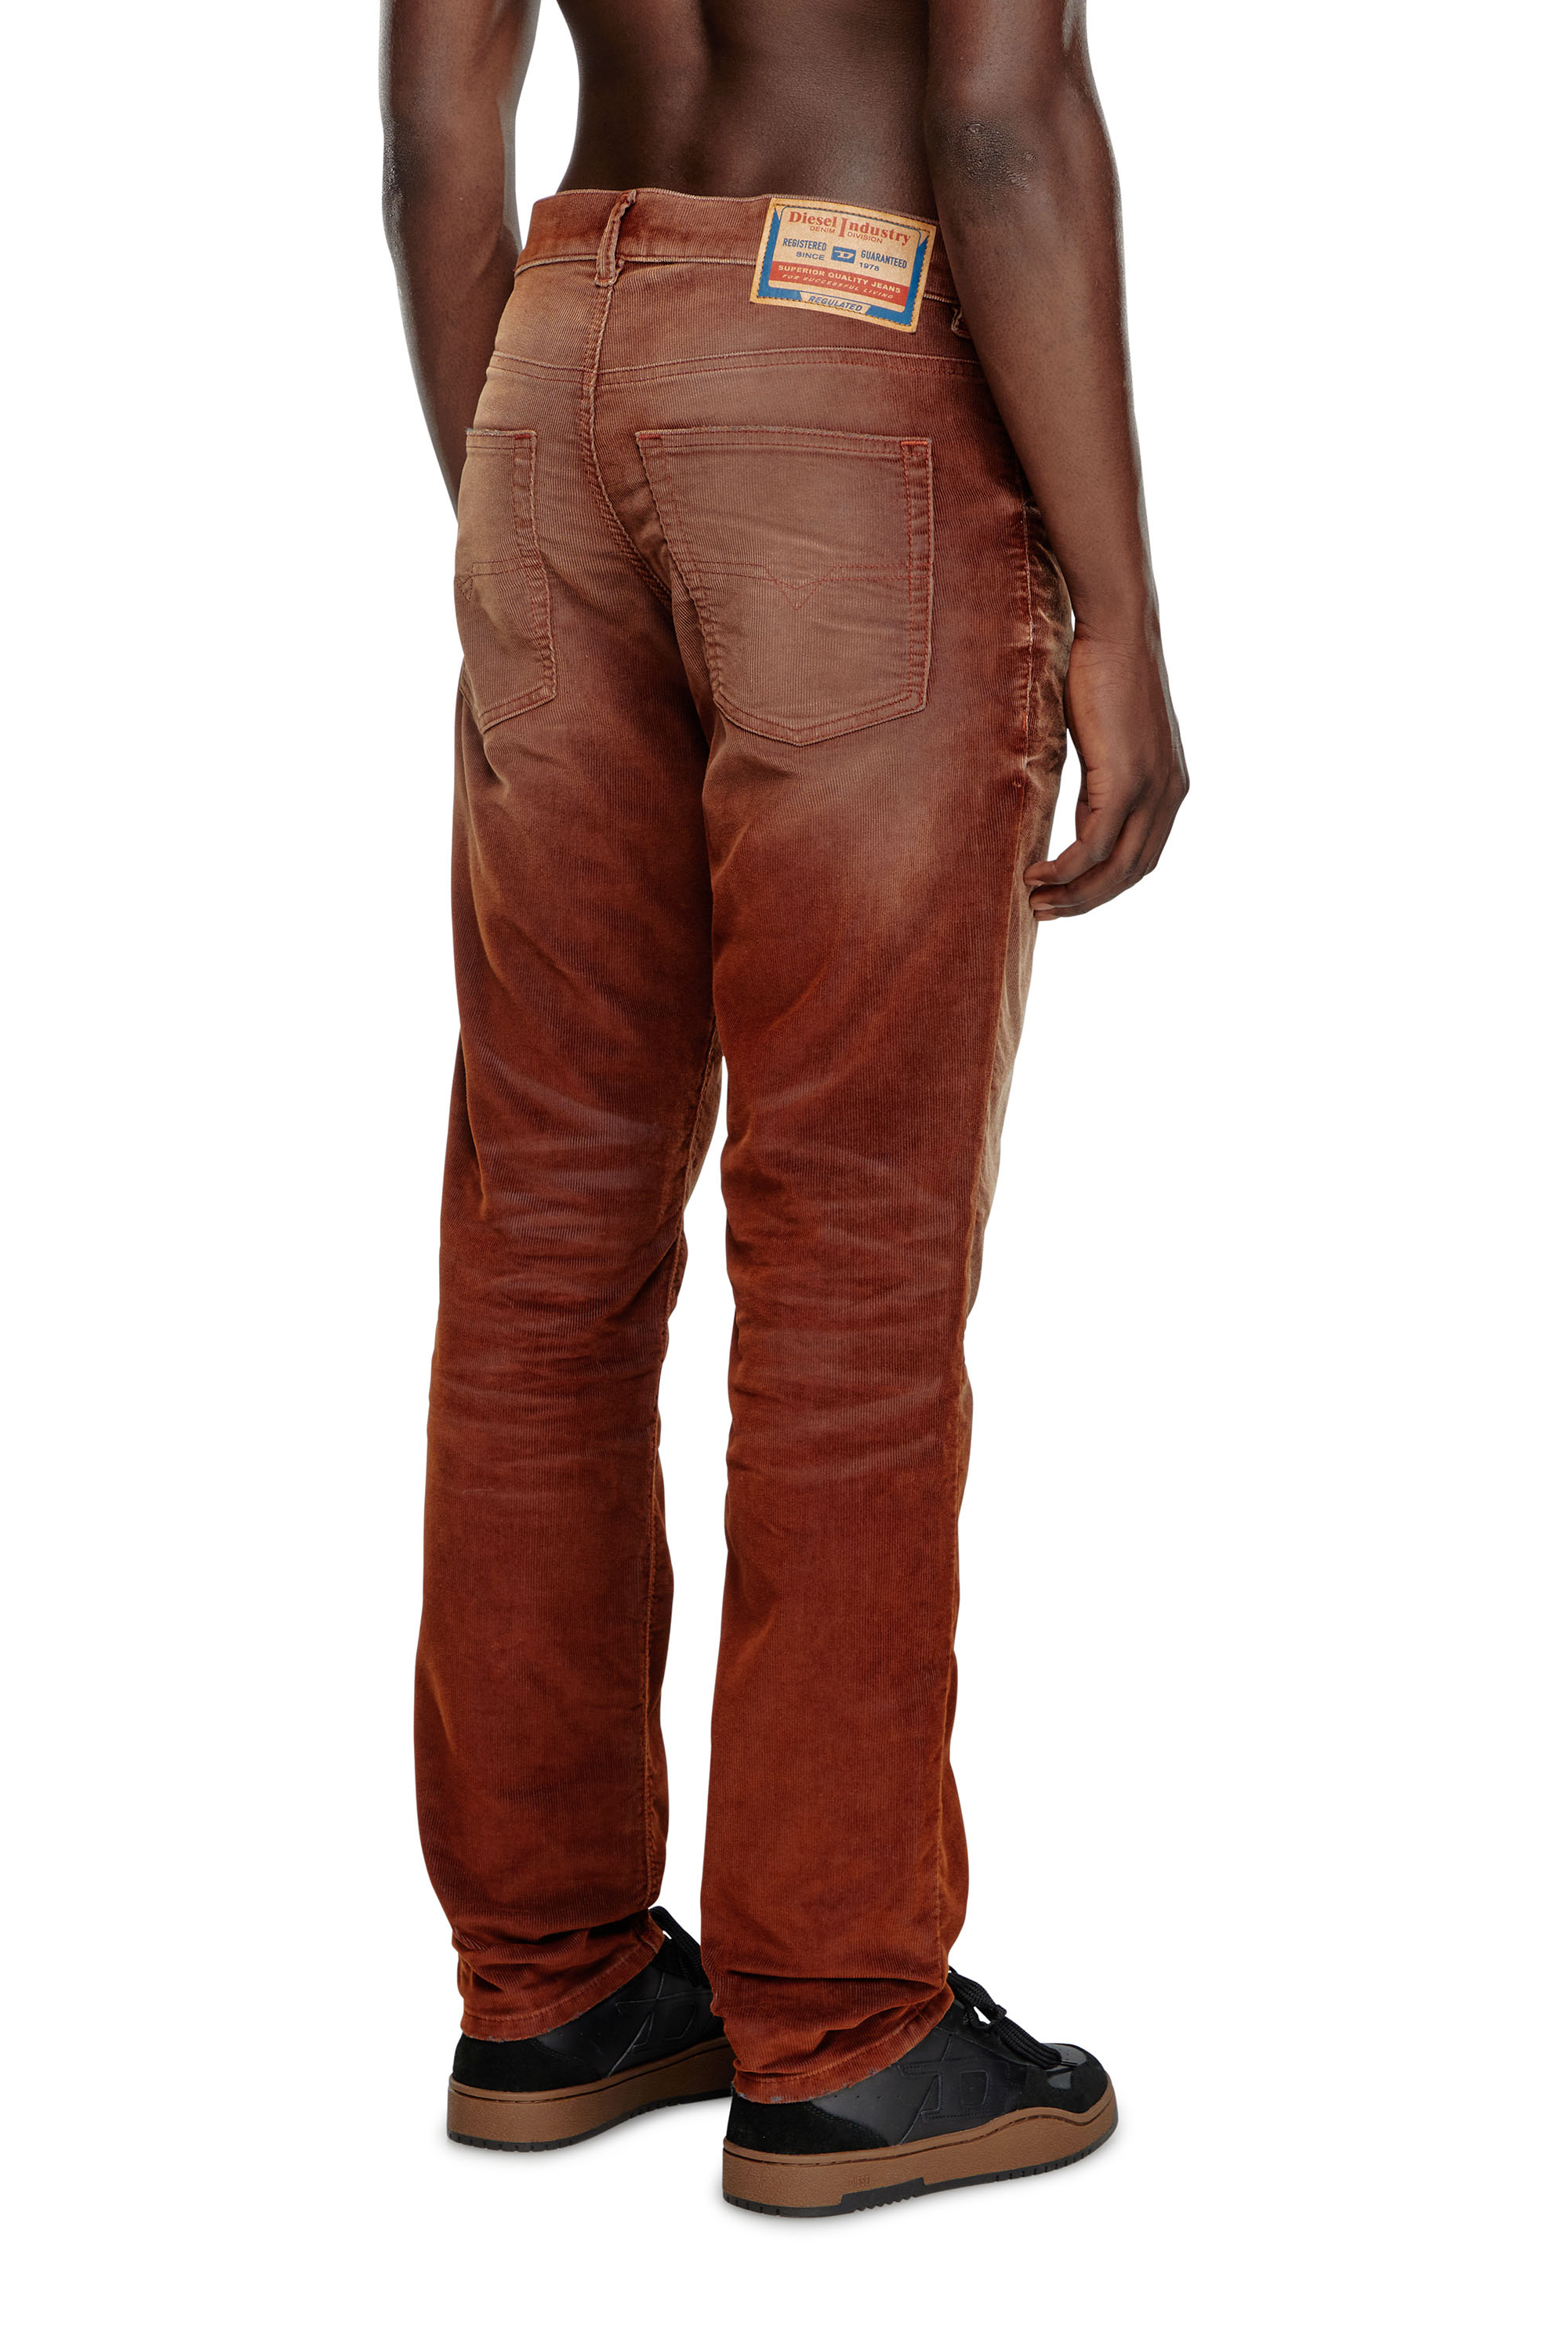 Diesel - Tapered Jeans 2023 D-Finitive 003II, Hombre Tapered Jeans - 2023 D-Finitive in Marrón - Image 4